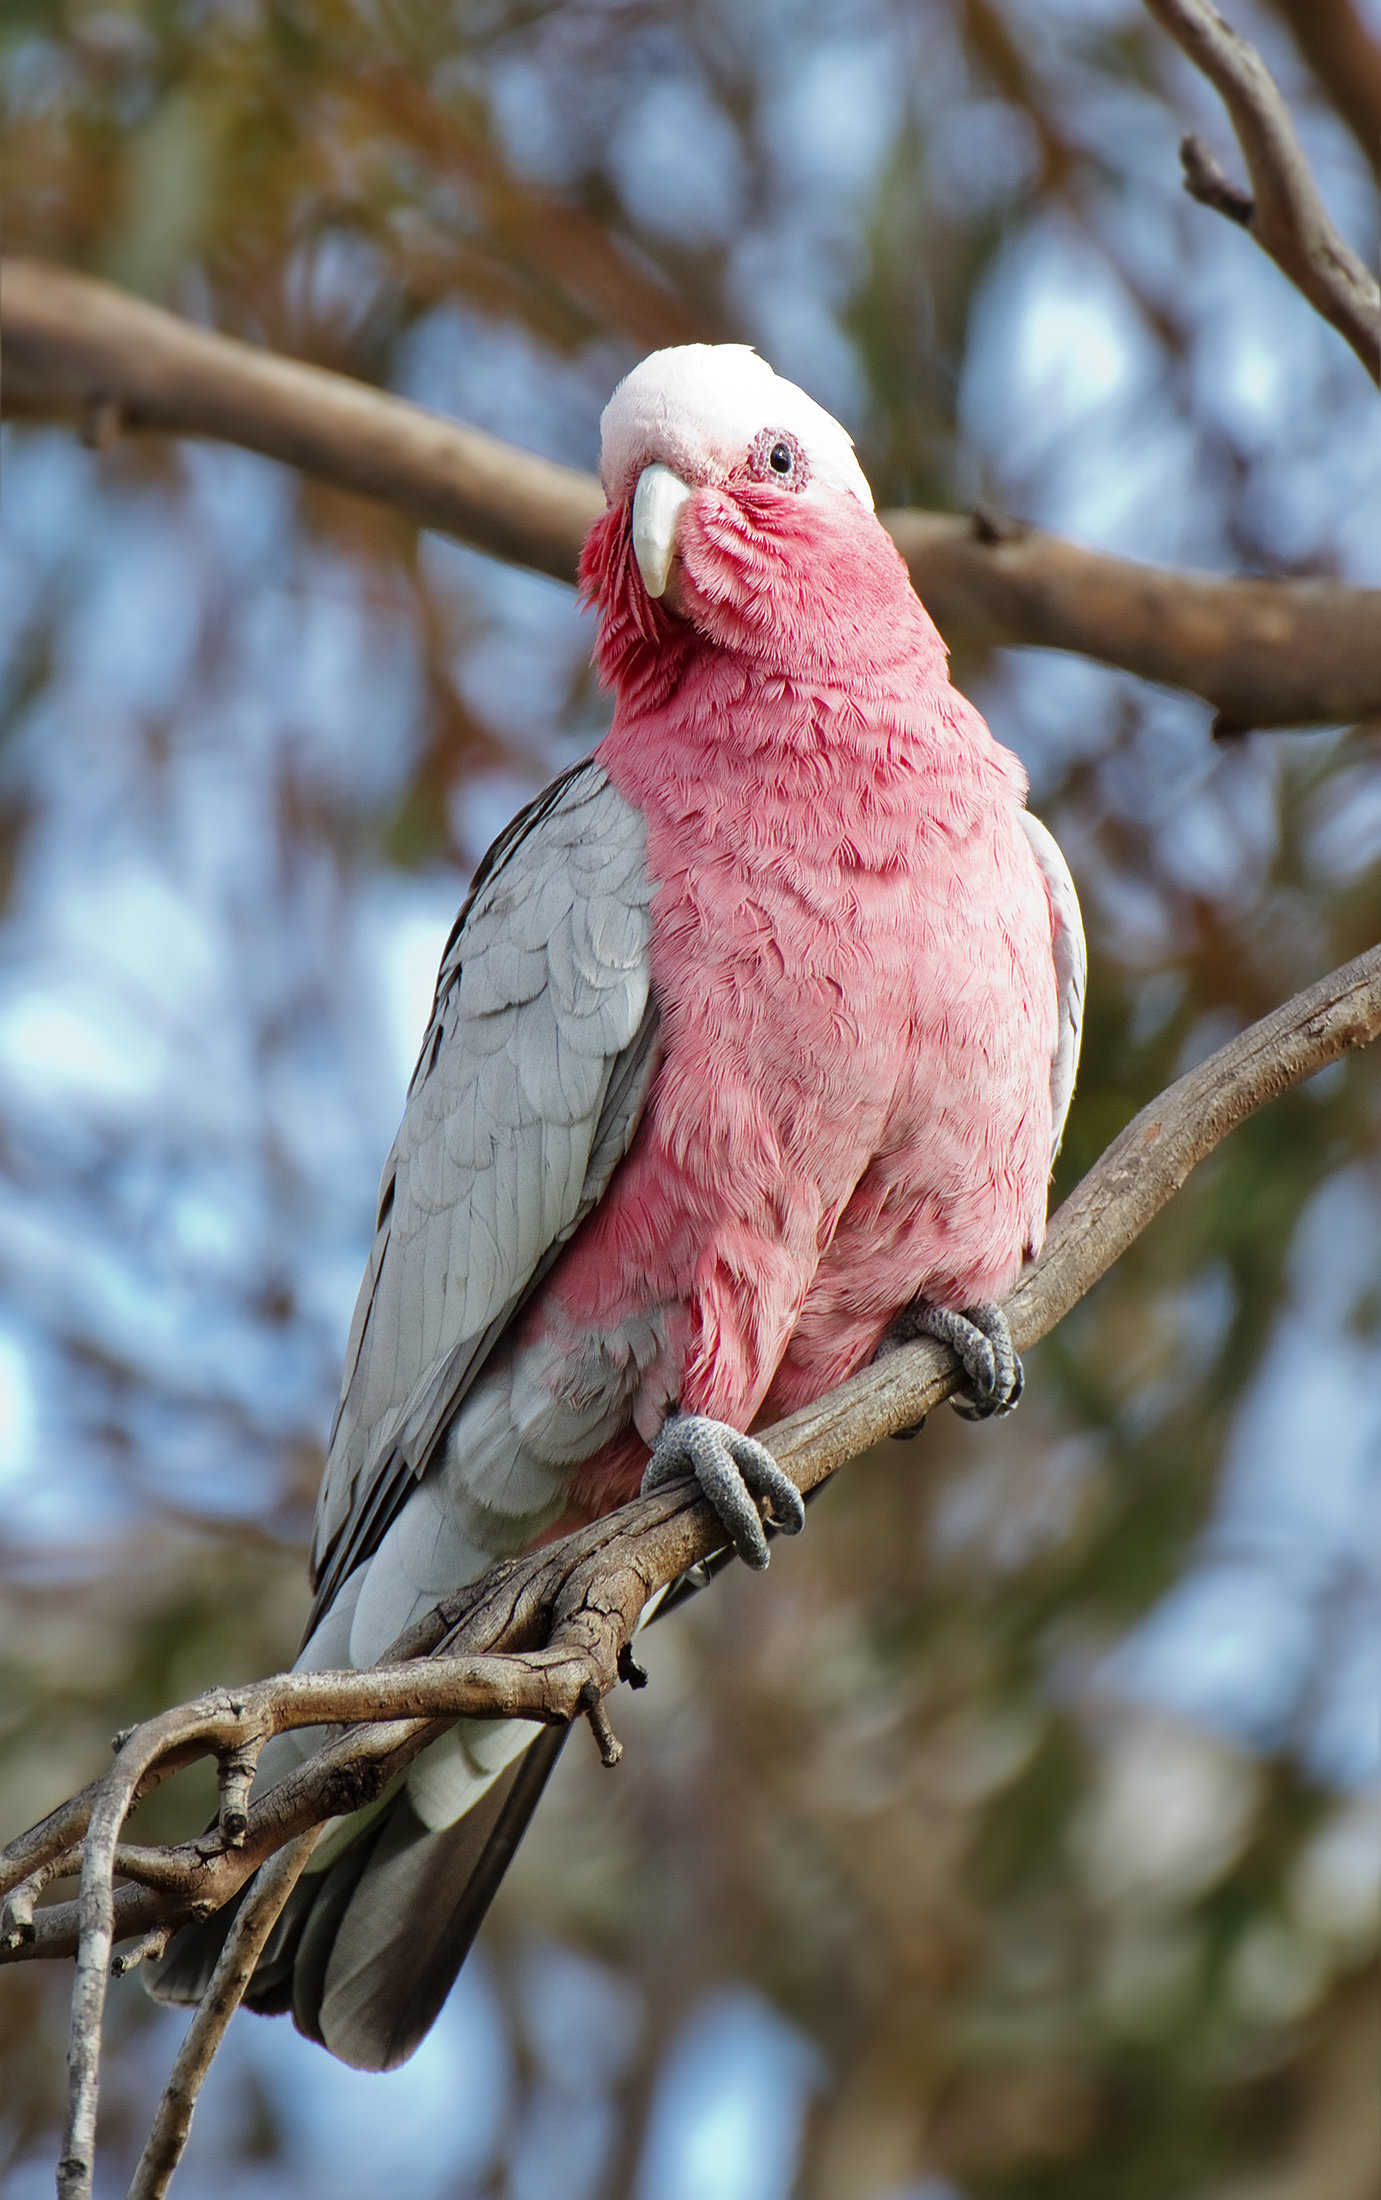 These pink-faced birds will capture your heart with their exquisite colors! – The Daily Worlds